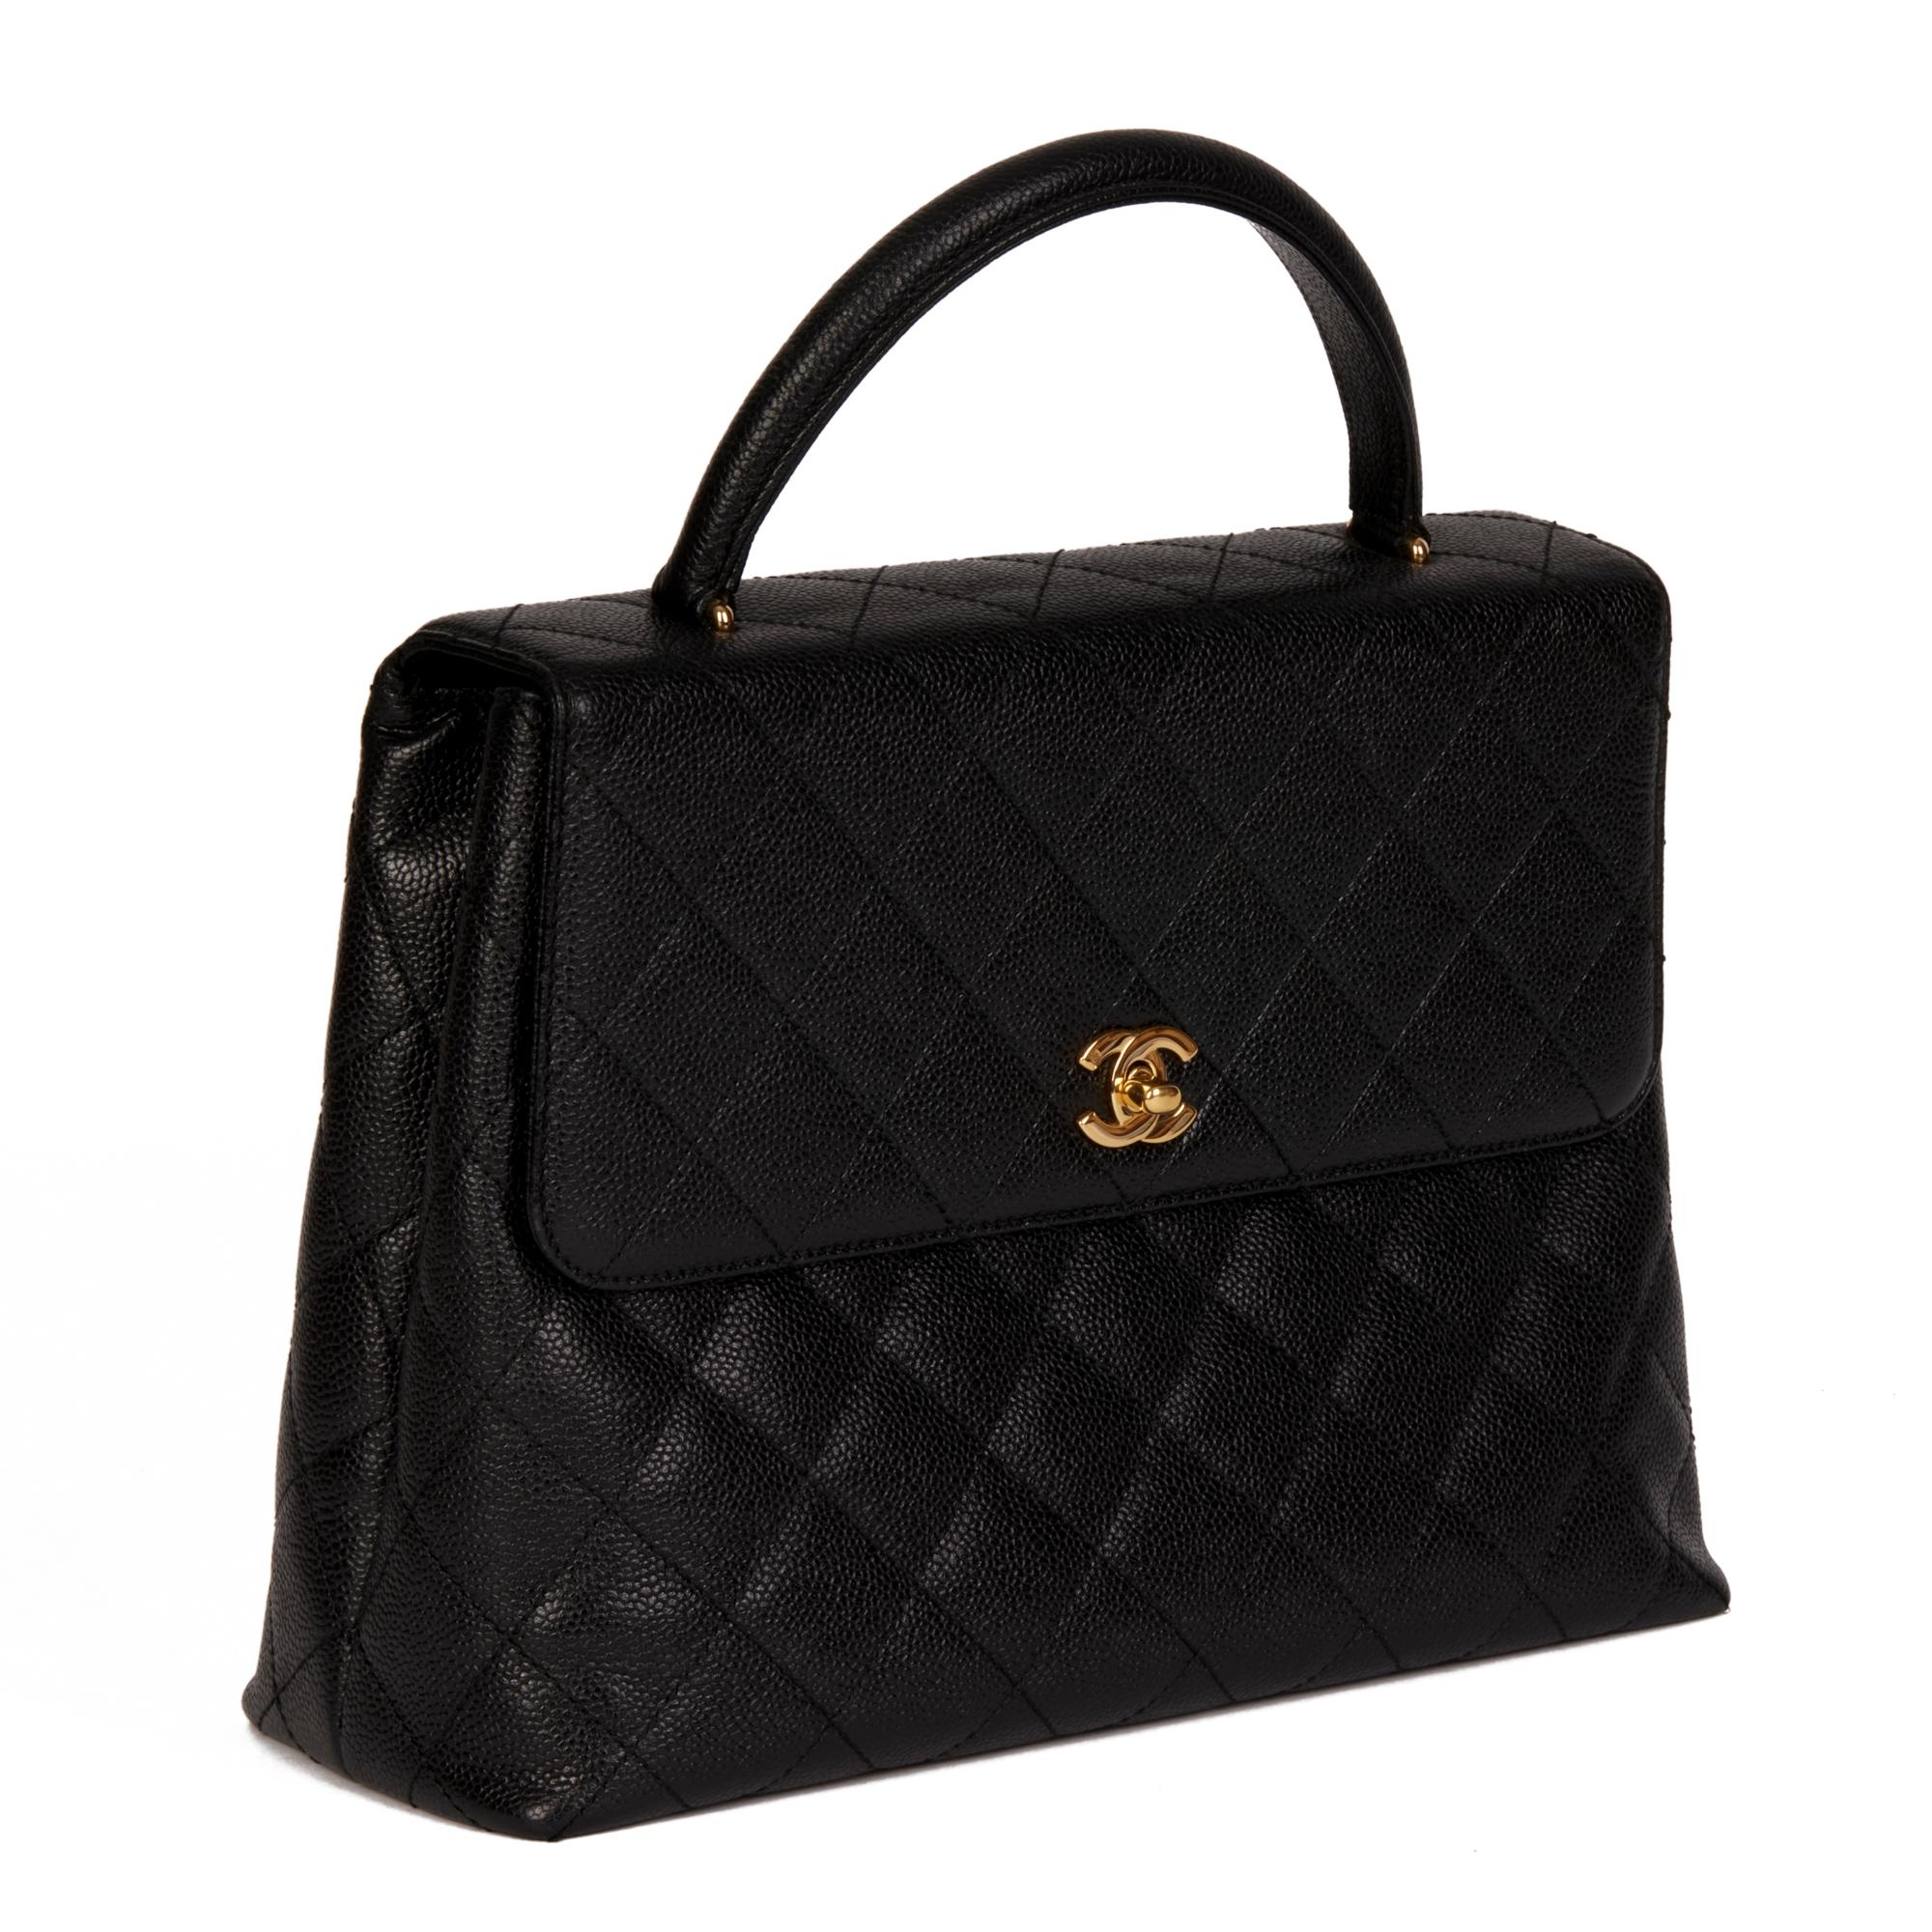 CHANEL
Black Quilted Caviar Leather Vintage Classic Kelly

Xupes Reference: HB4409
Serial Number: 68699598
Age (Circa): 2002
Accompanied By: Chanel Dust Bag, Authenticity Card
Authenticity Details: Authenticity Card, Serial Sticker (Made in Italy)